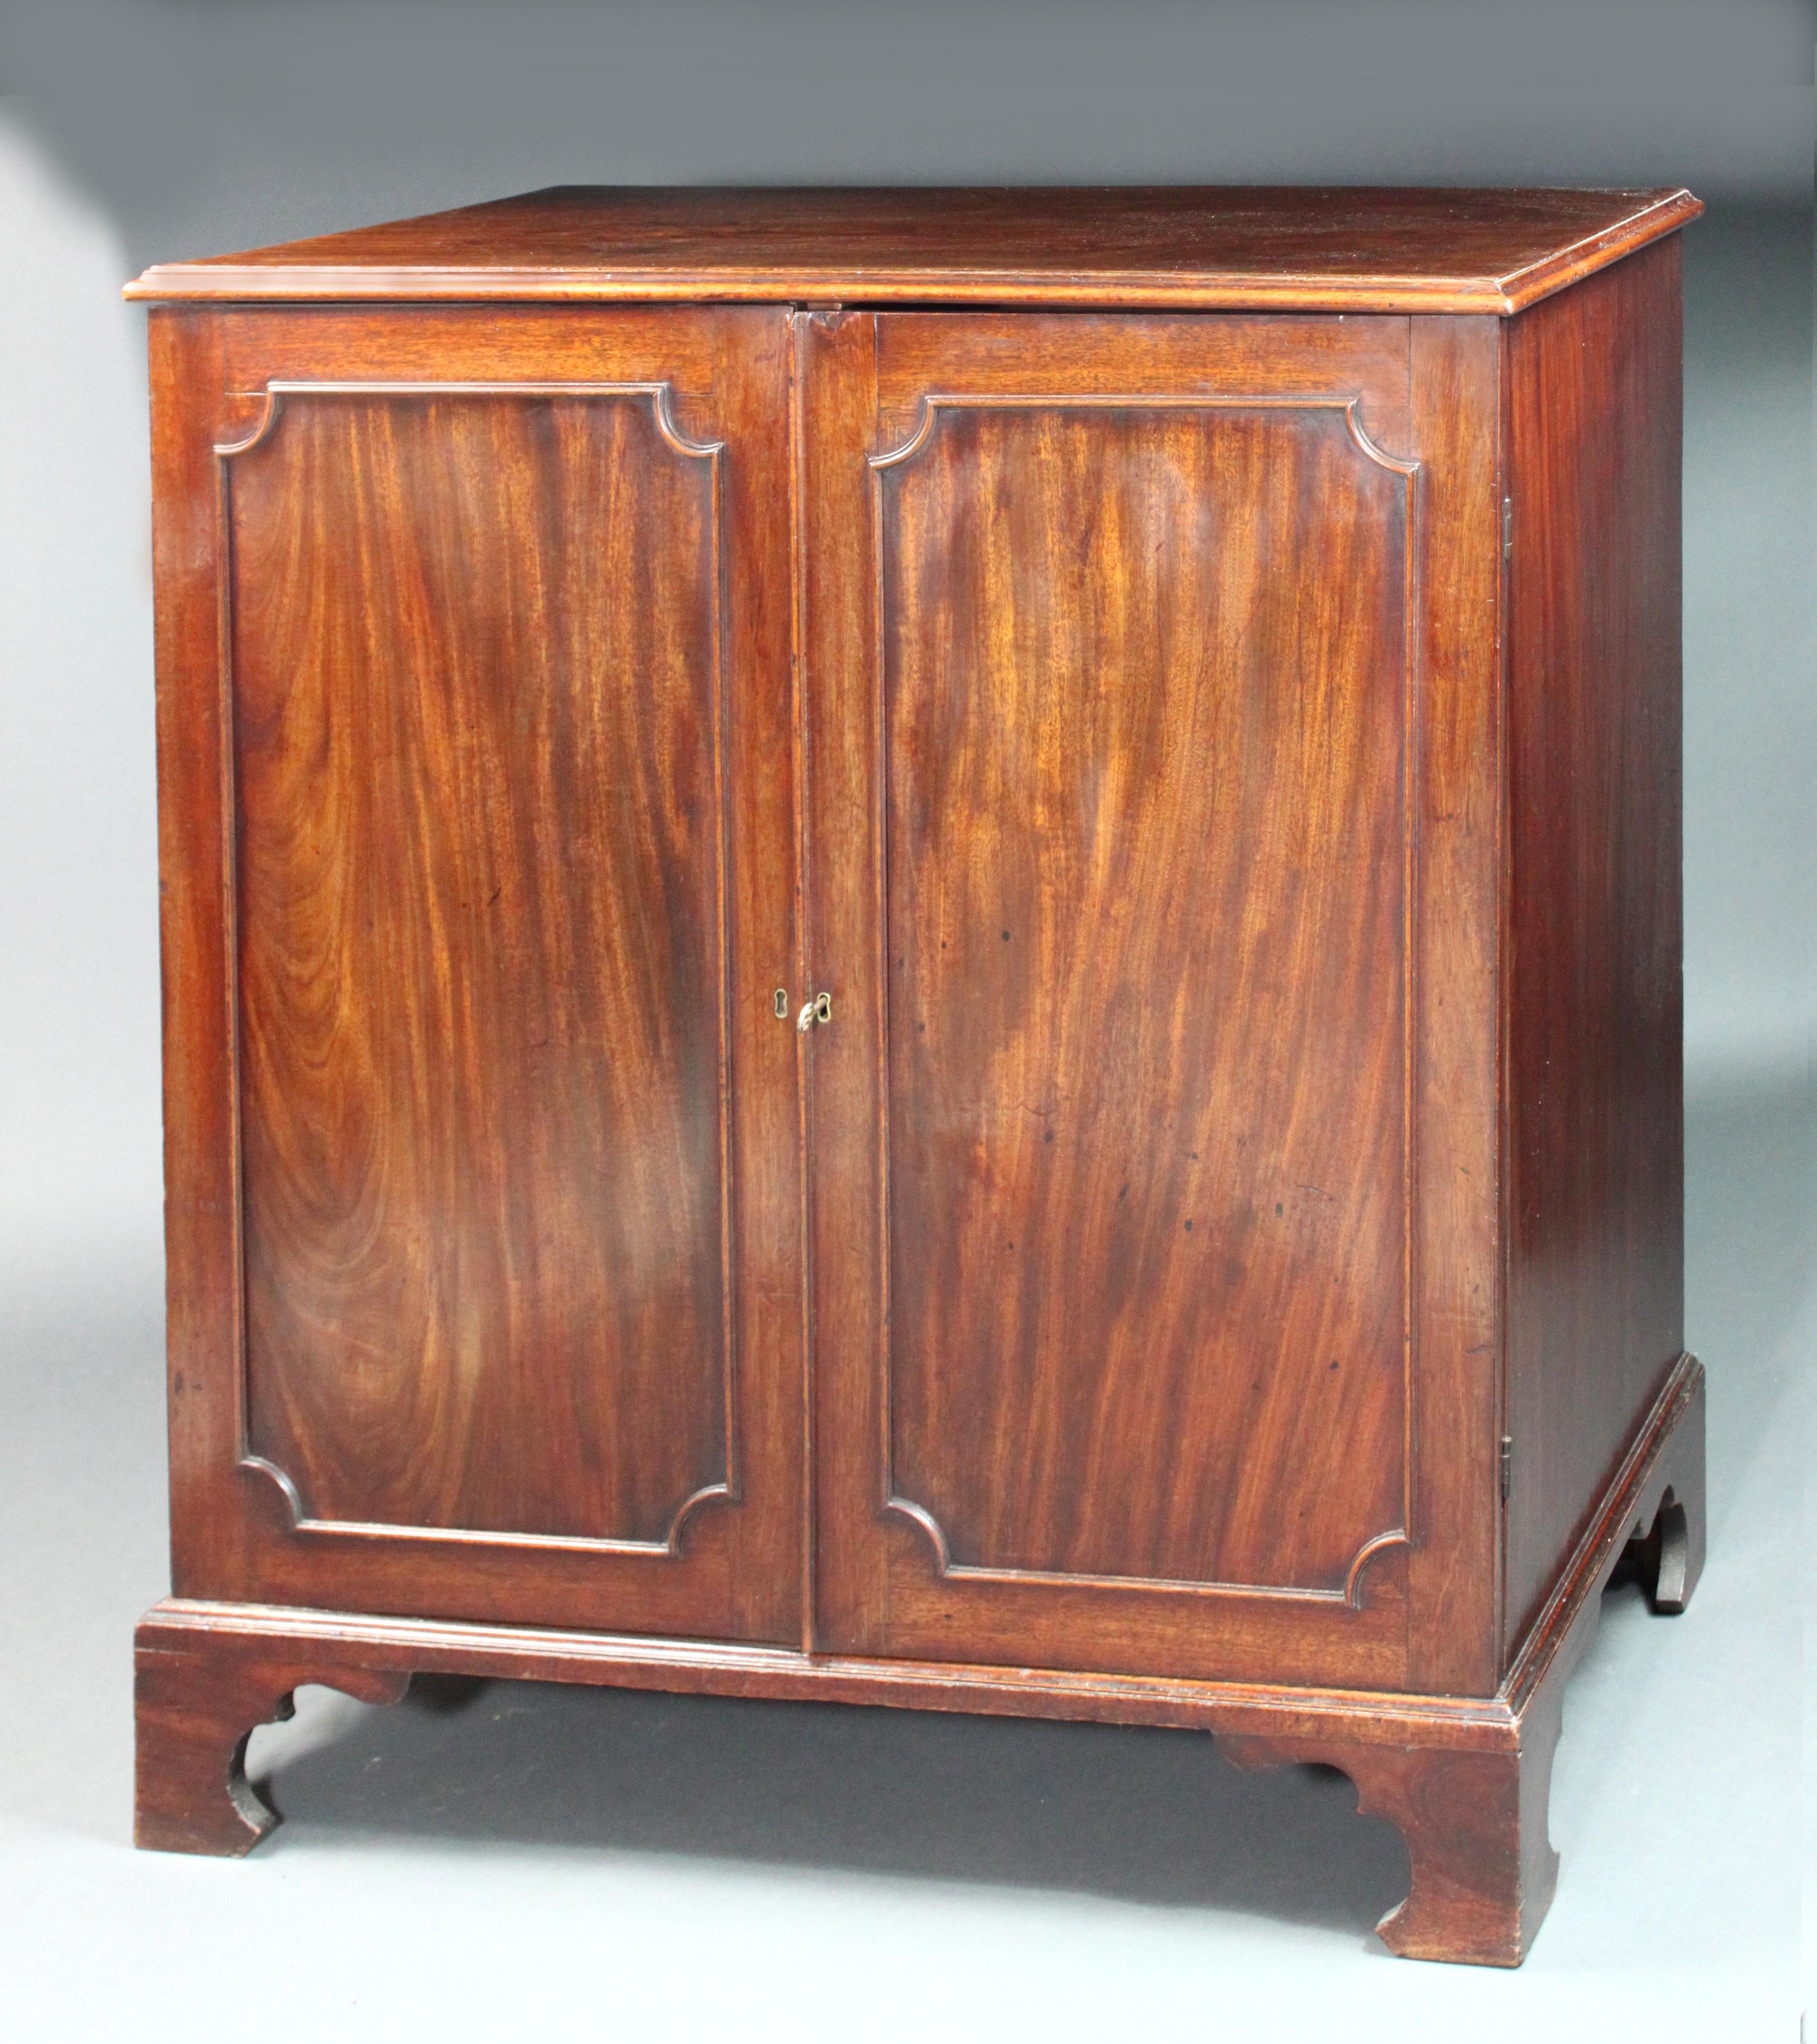 George III Chippendale period mahogany low cupboard of a good colour and patina complete with internal slides, all original.